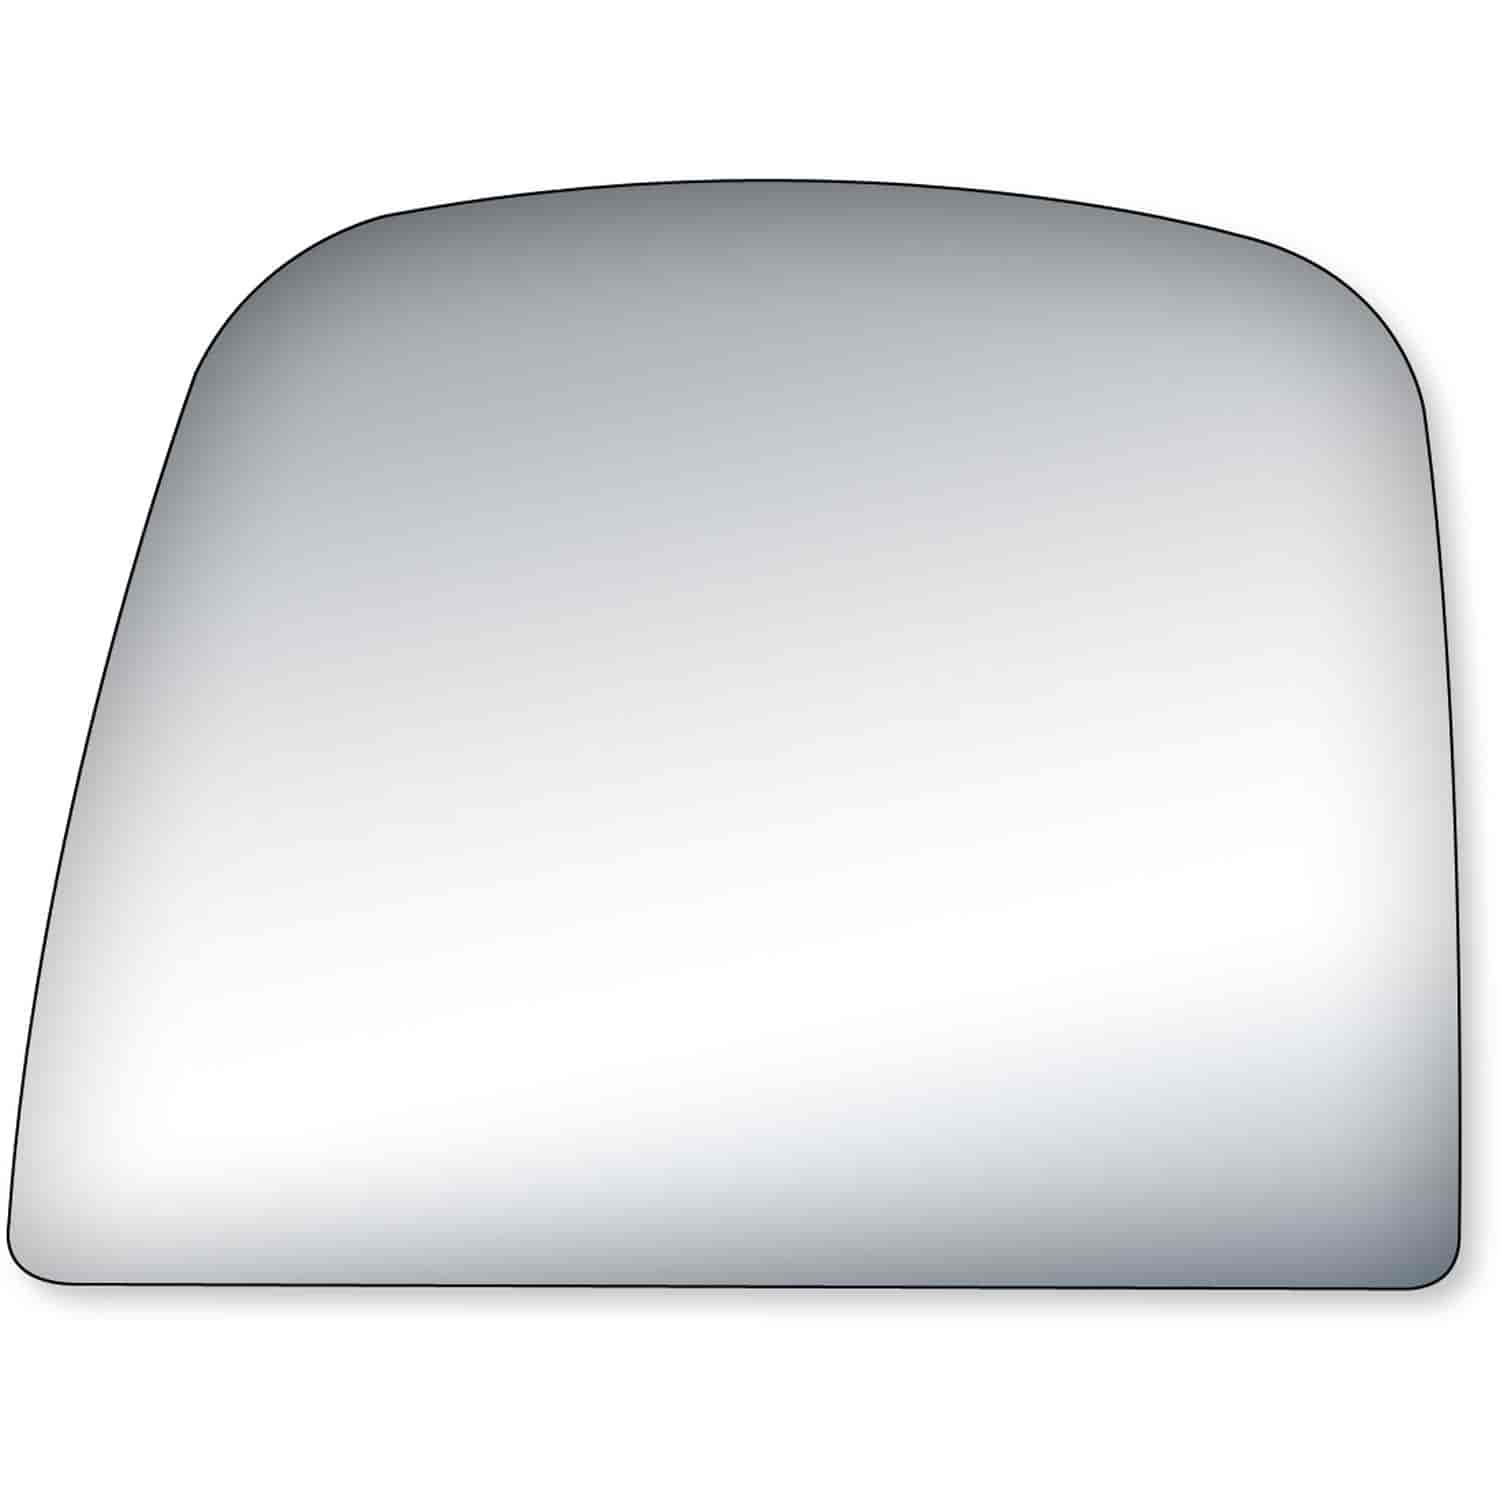 Replacement Glass for 08-14 Express Full Size Van top lens ; 08-14 Savana Full Size Van top lens the